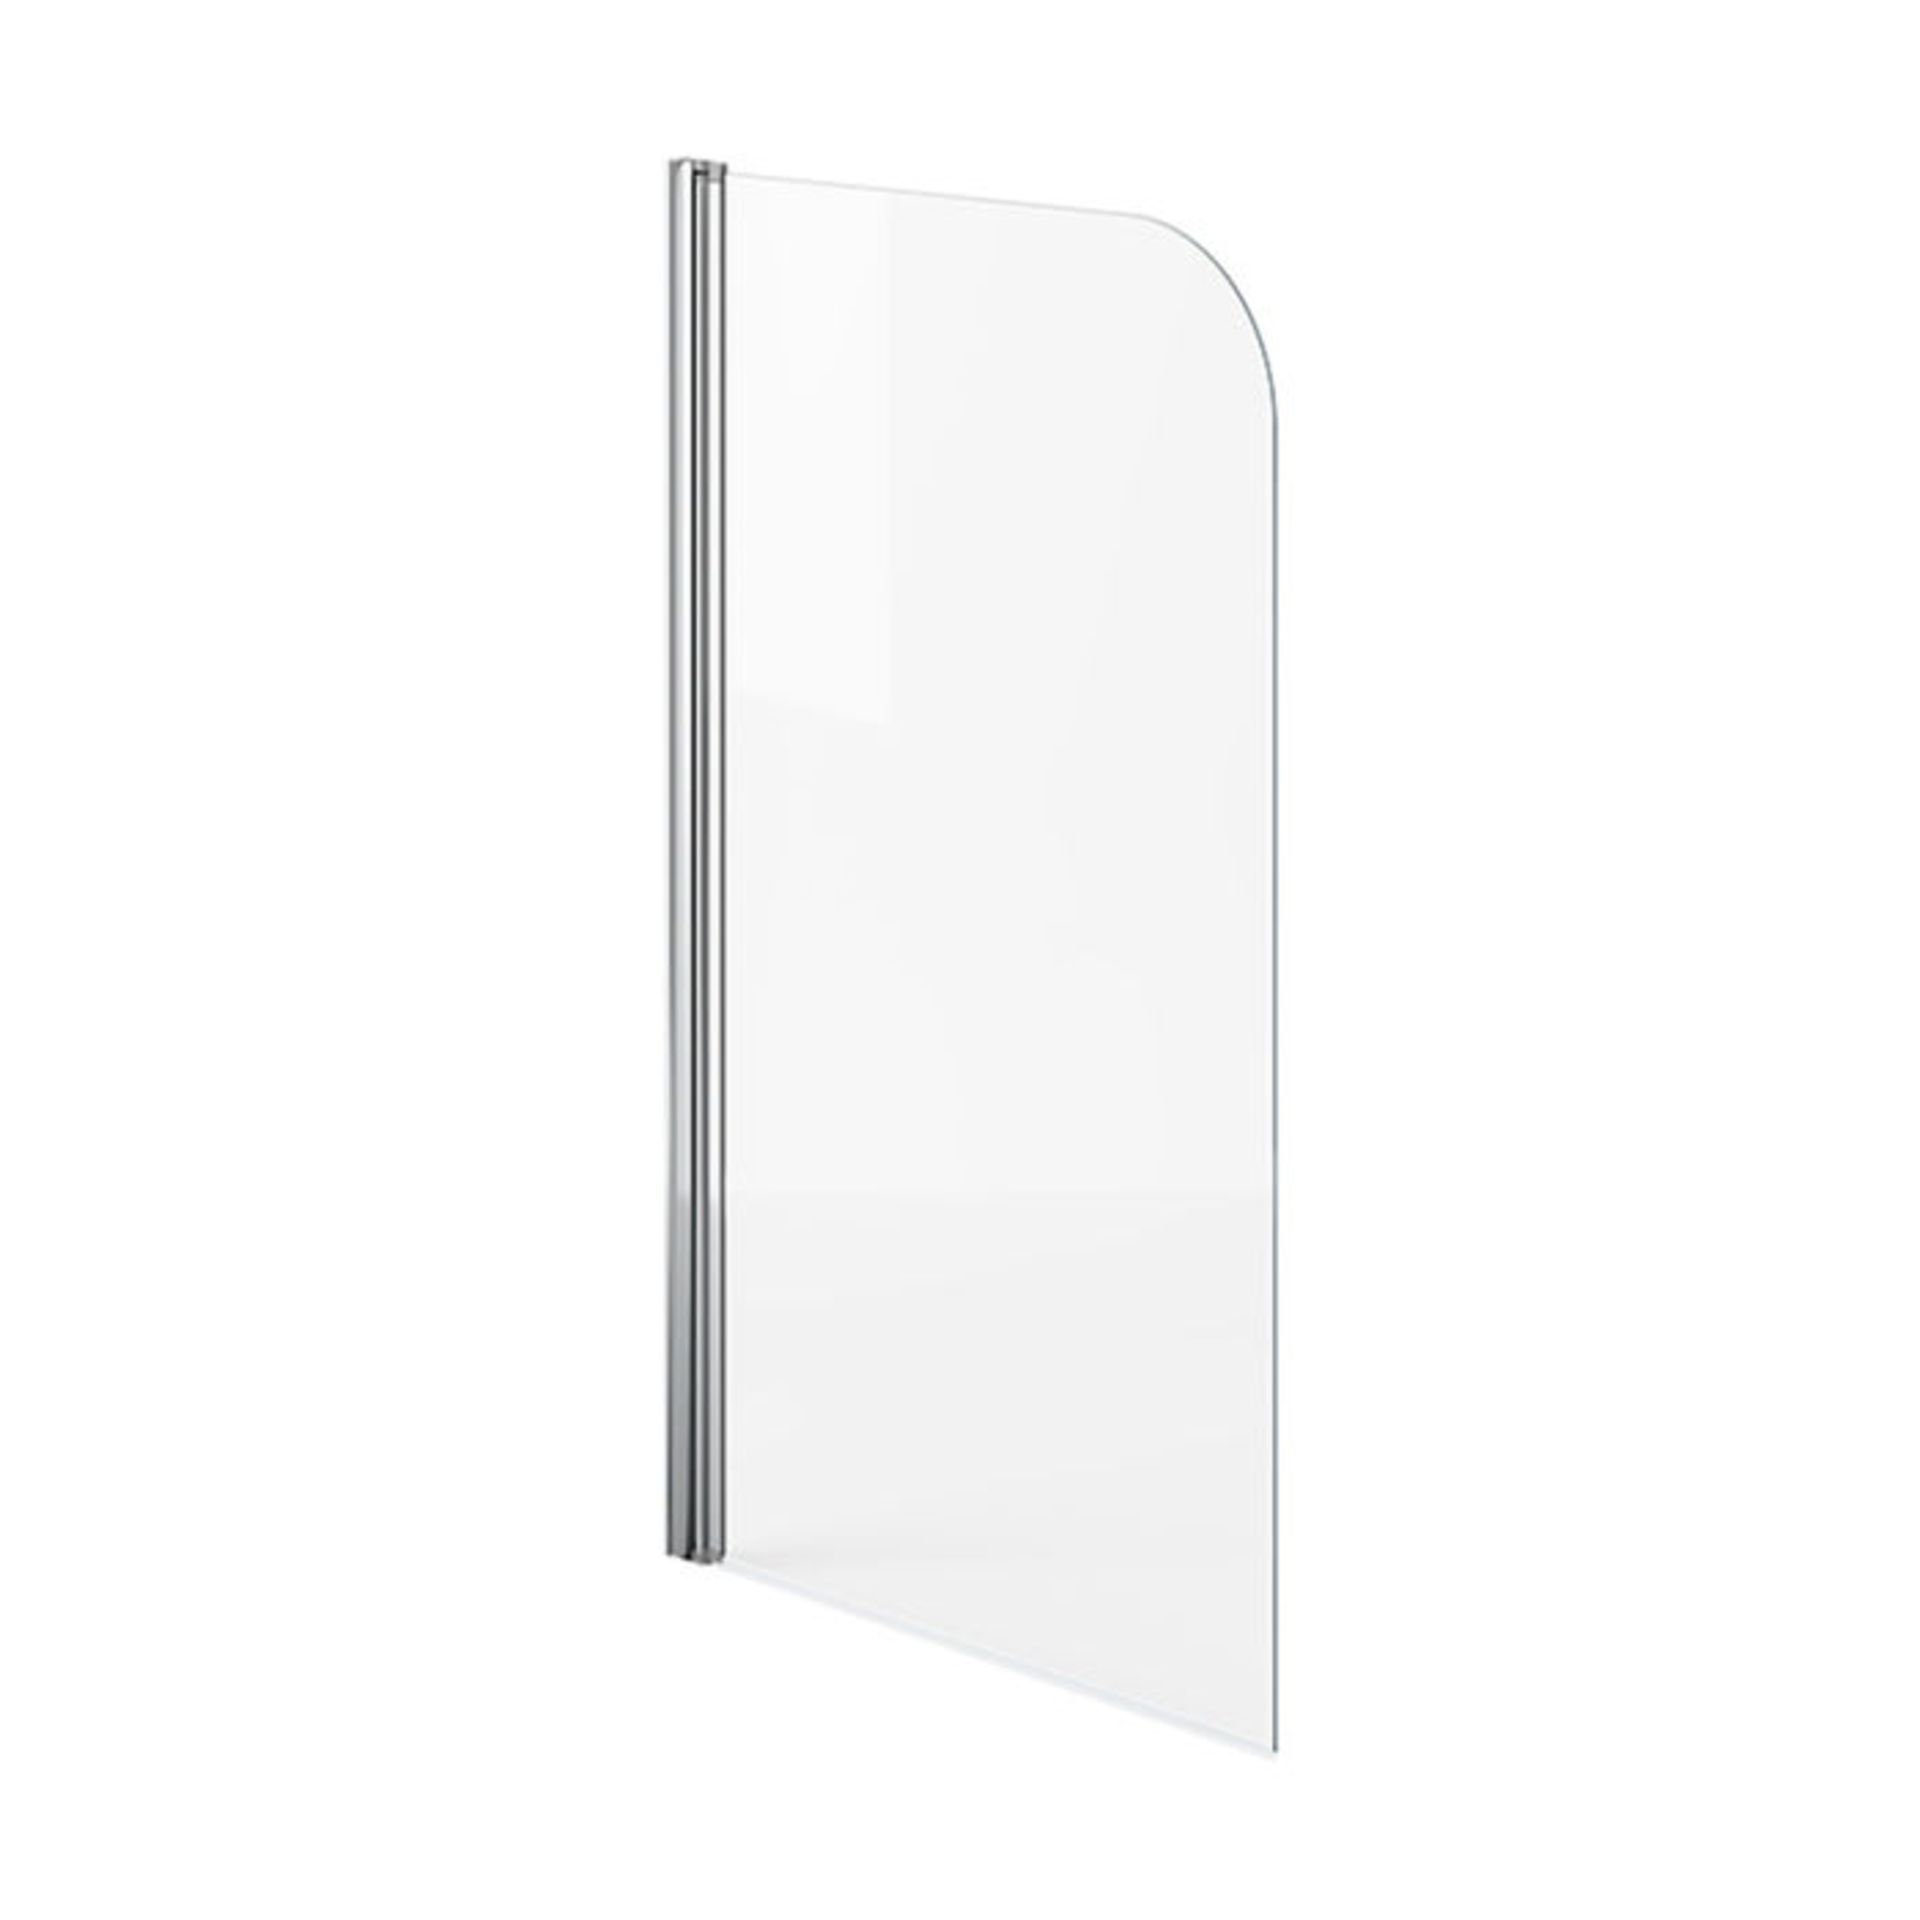 (MW47) 800mm Bath Shower Screen Great addition to your shower bath 4mm tempered safety glass